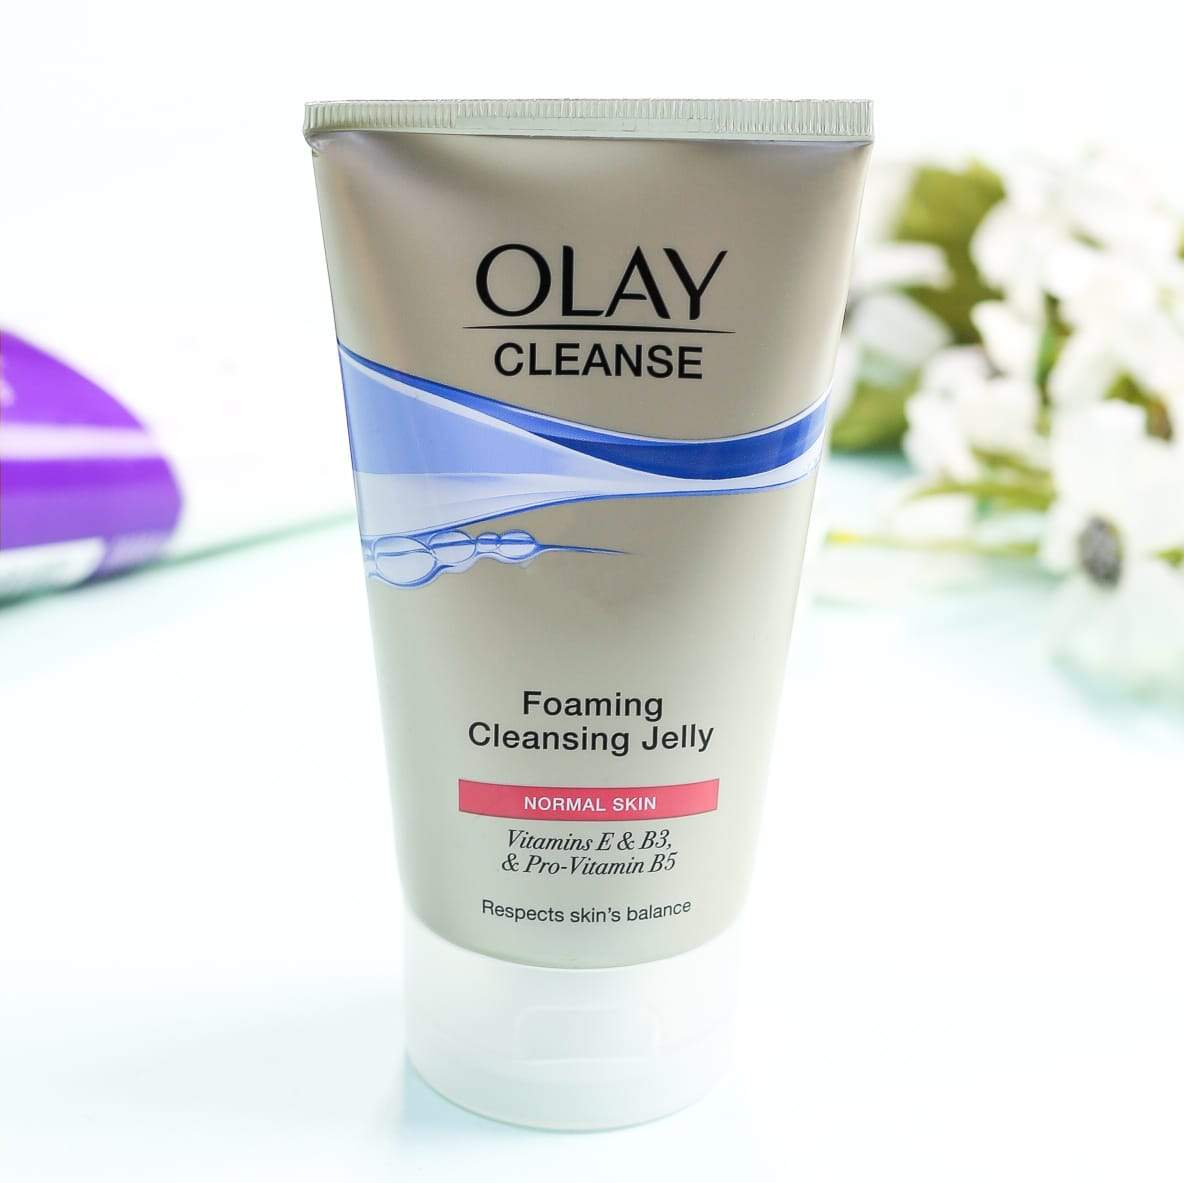 OLAY CLEANSE FOAMING CLEANSING JELLY NORMAL SKIN 150 ML